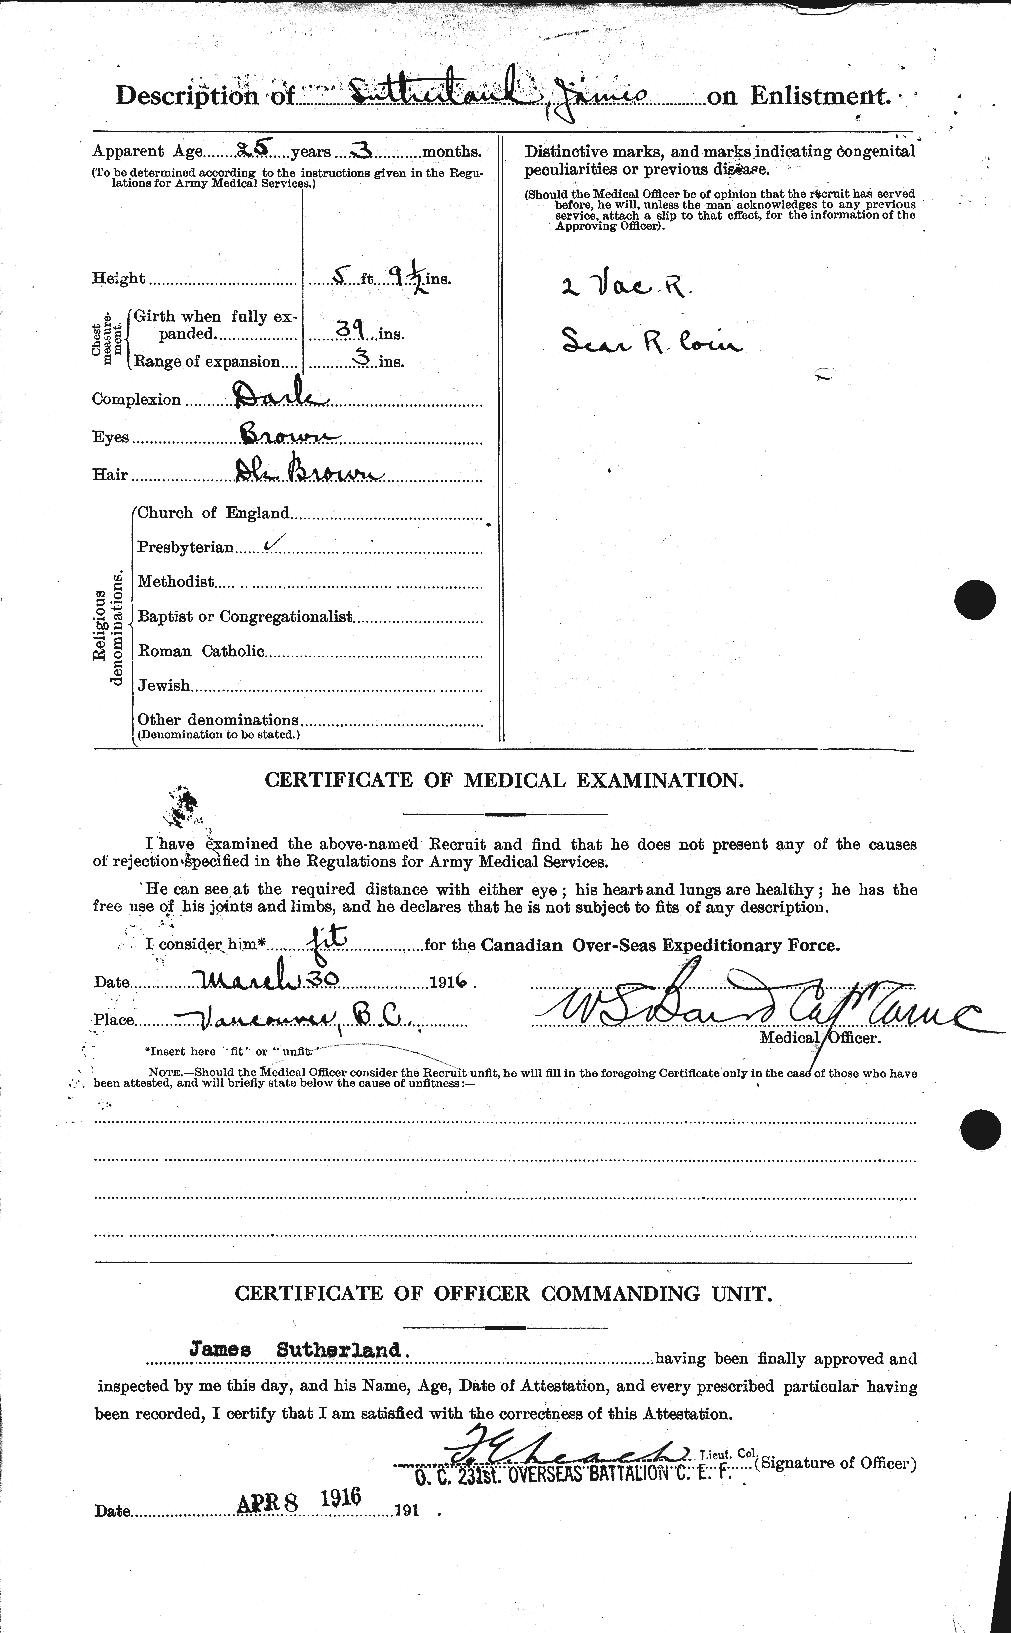 Personnel Records of the First World War - CEF 124765b